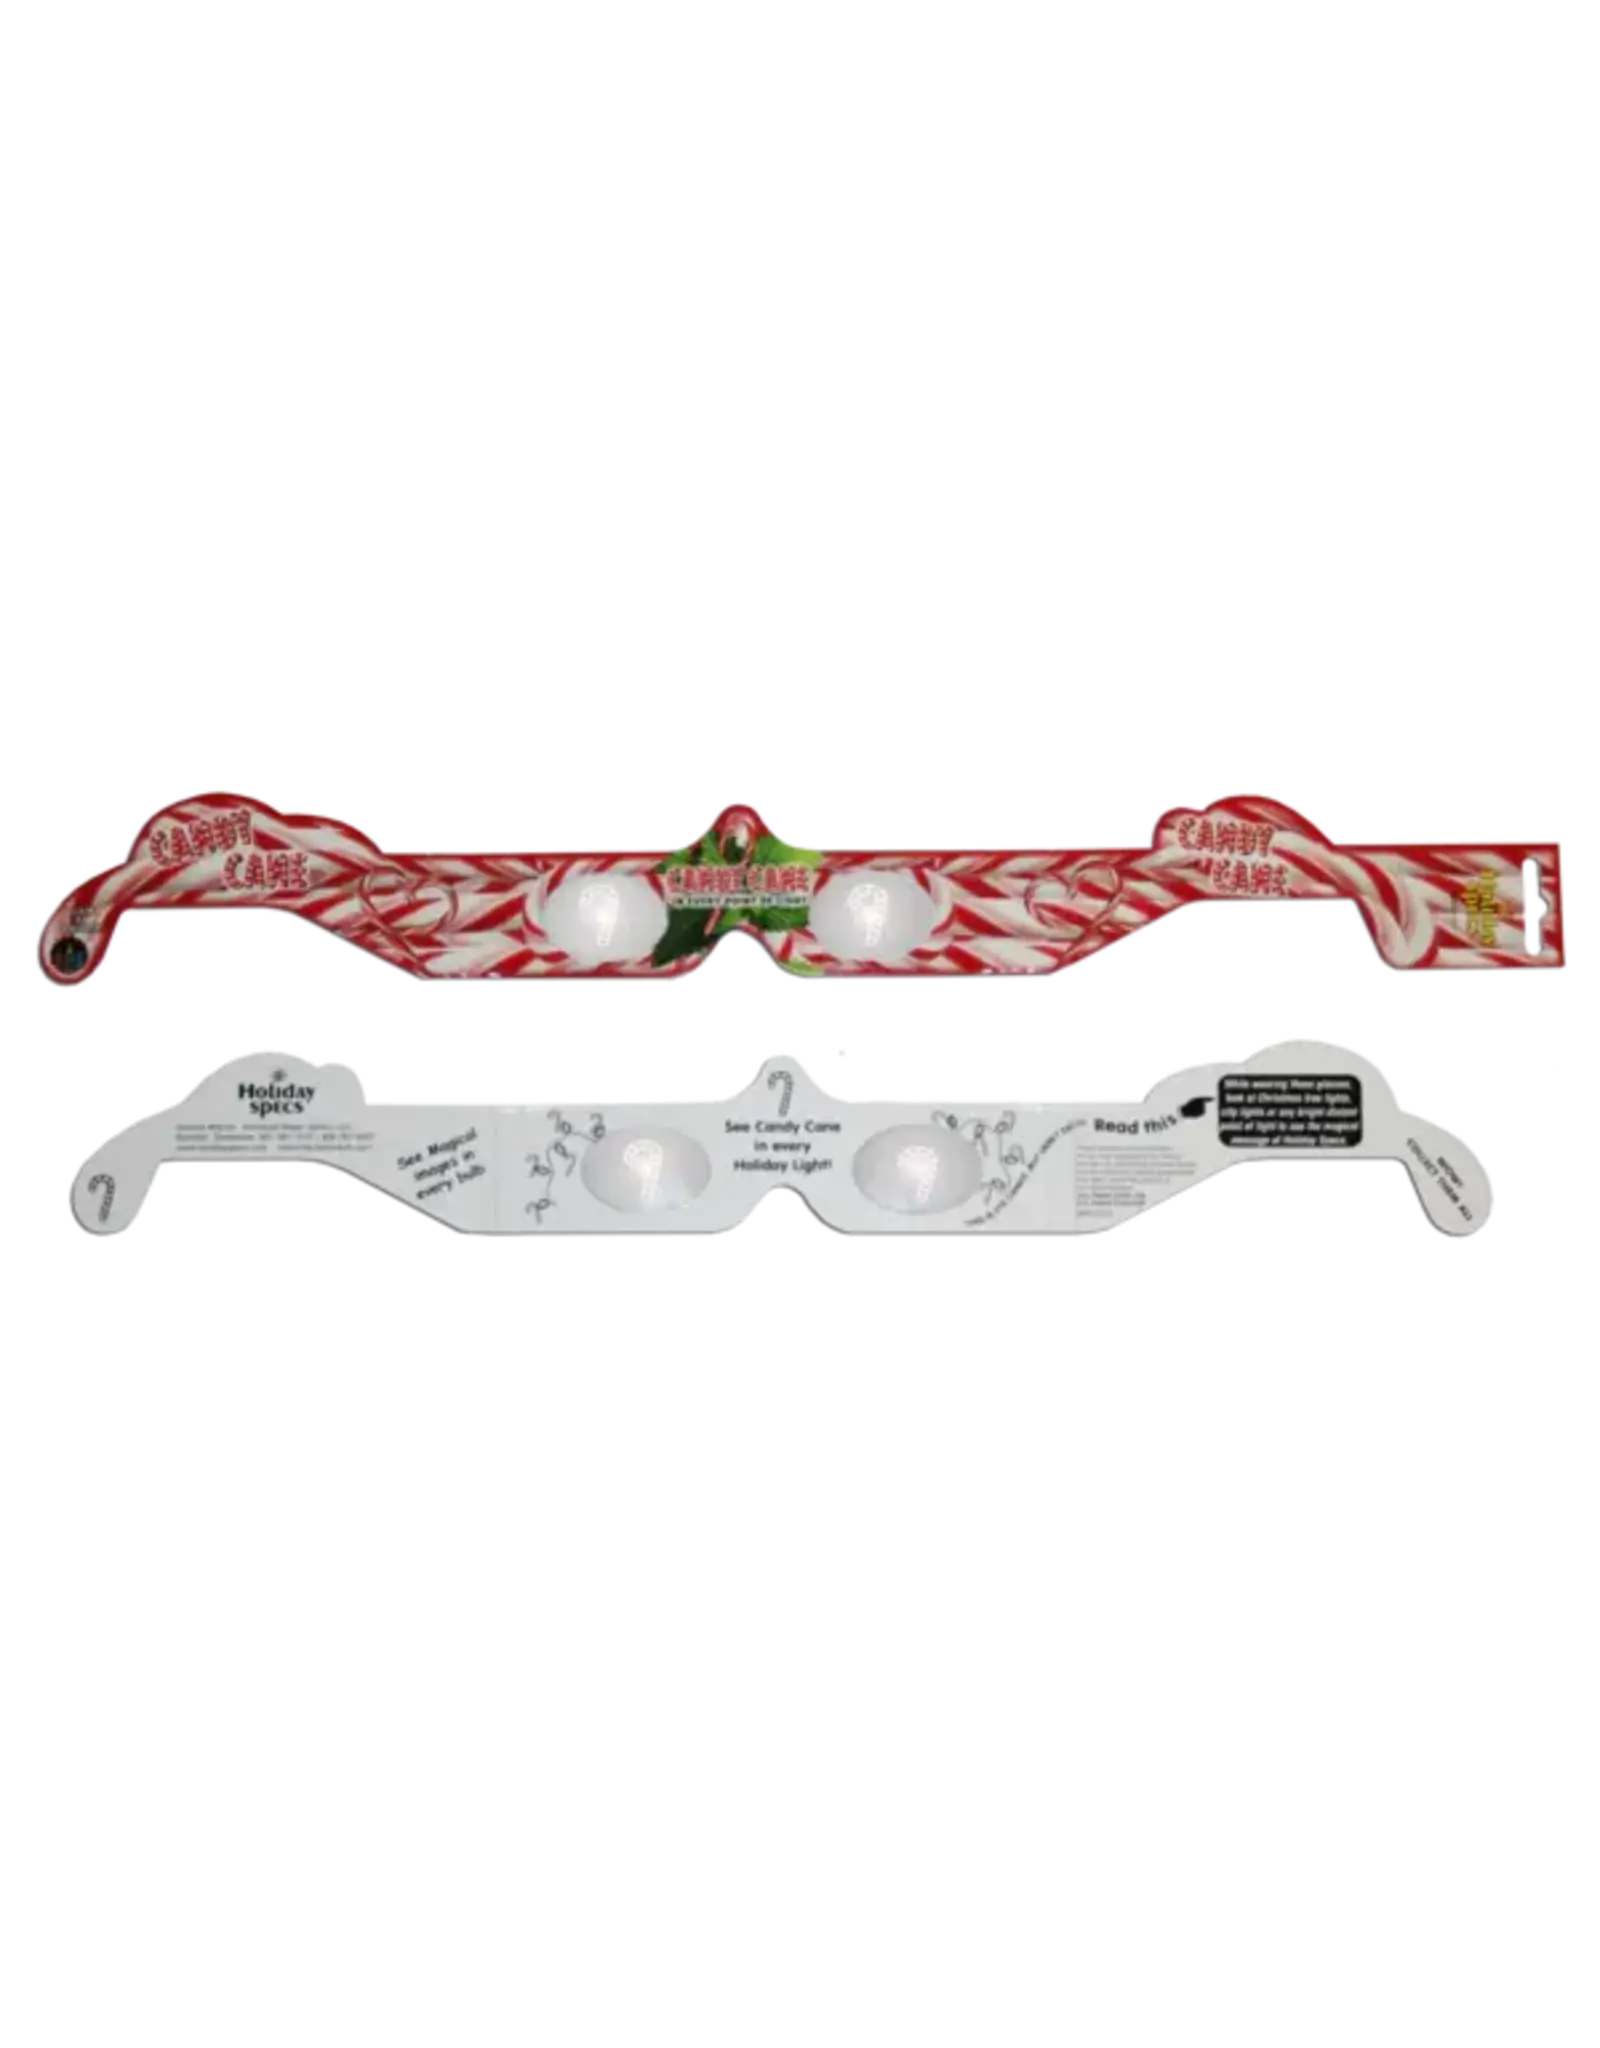 American Paper Optics Candy Cane Holiday Specs